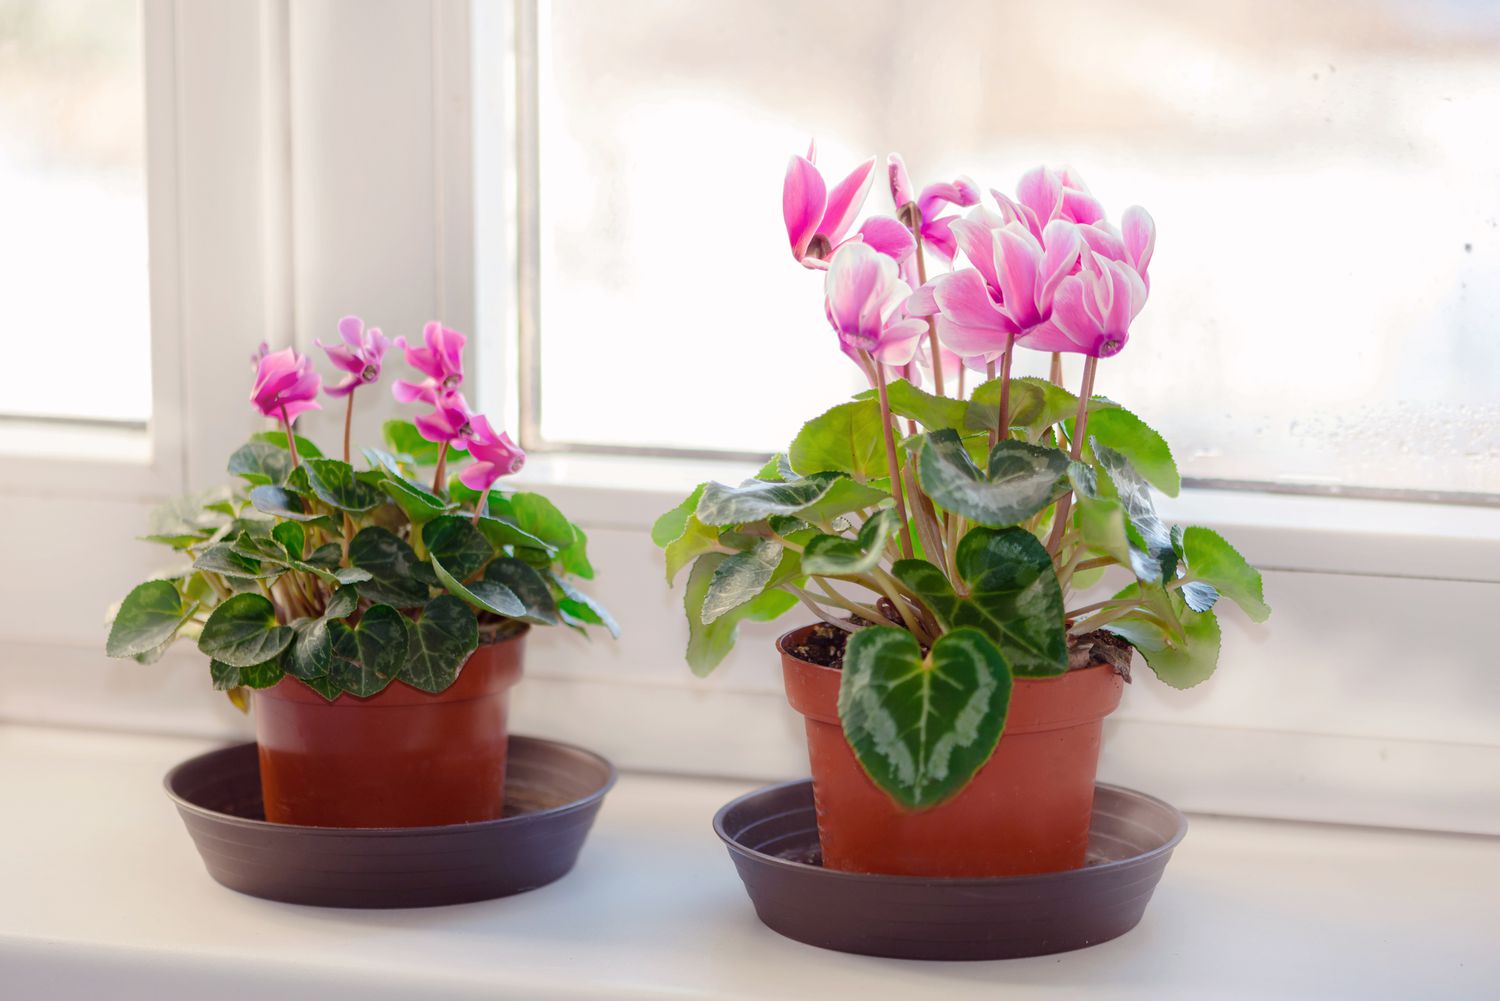 5 Easy Ways to Care for Pink Flowering Plants插图